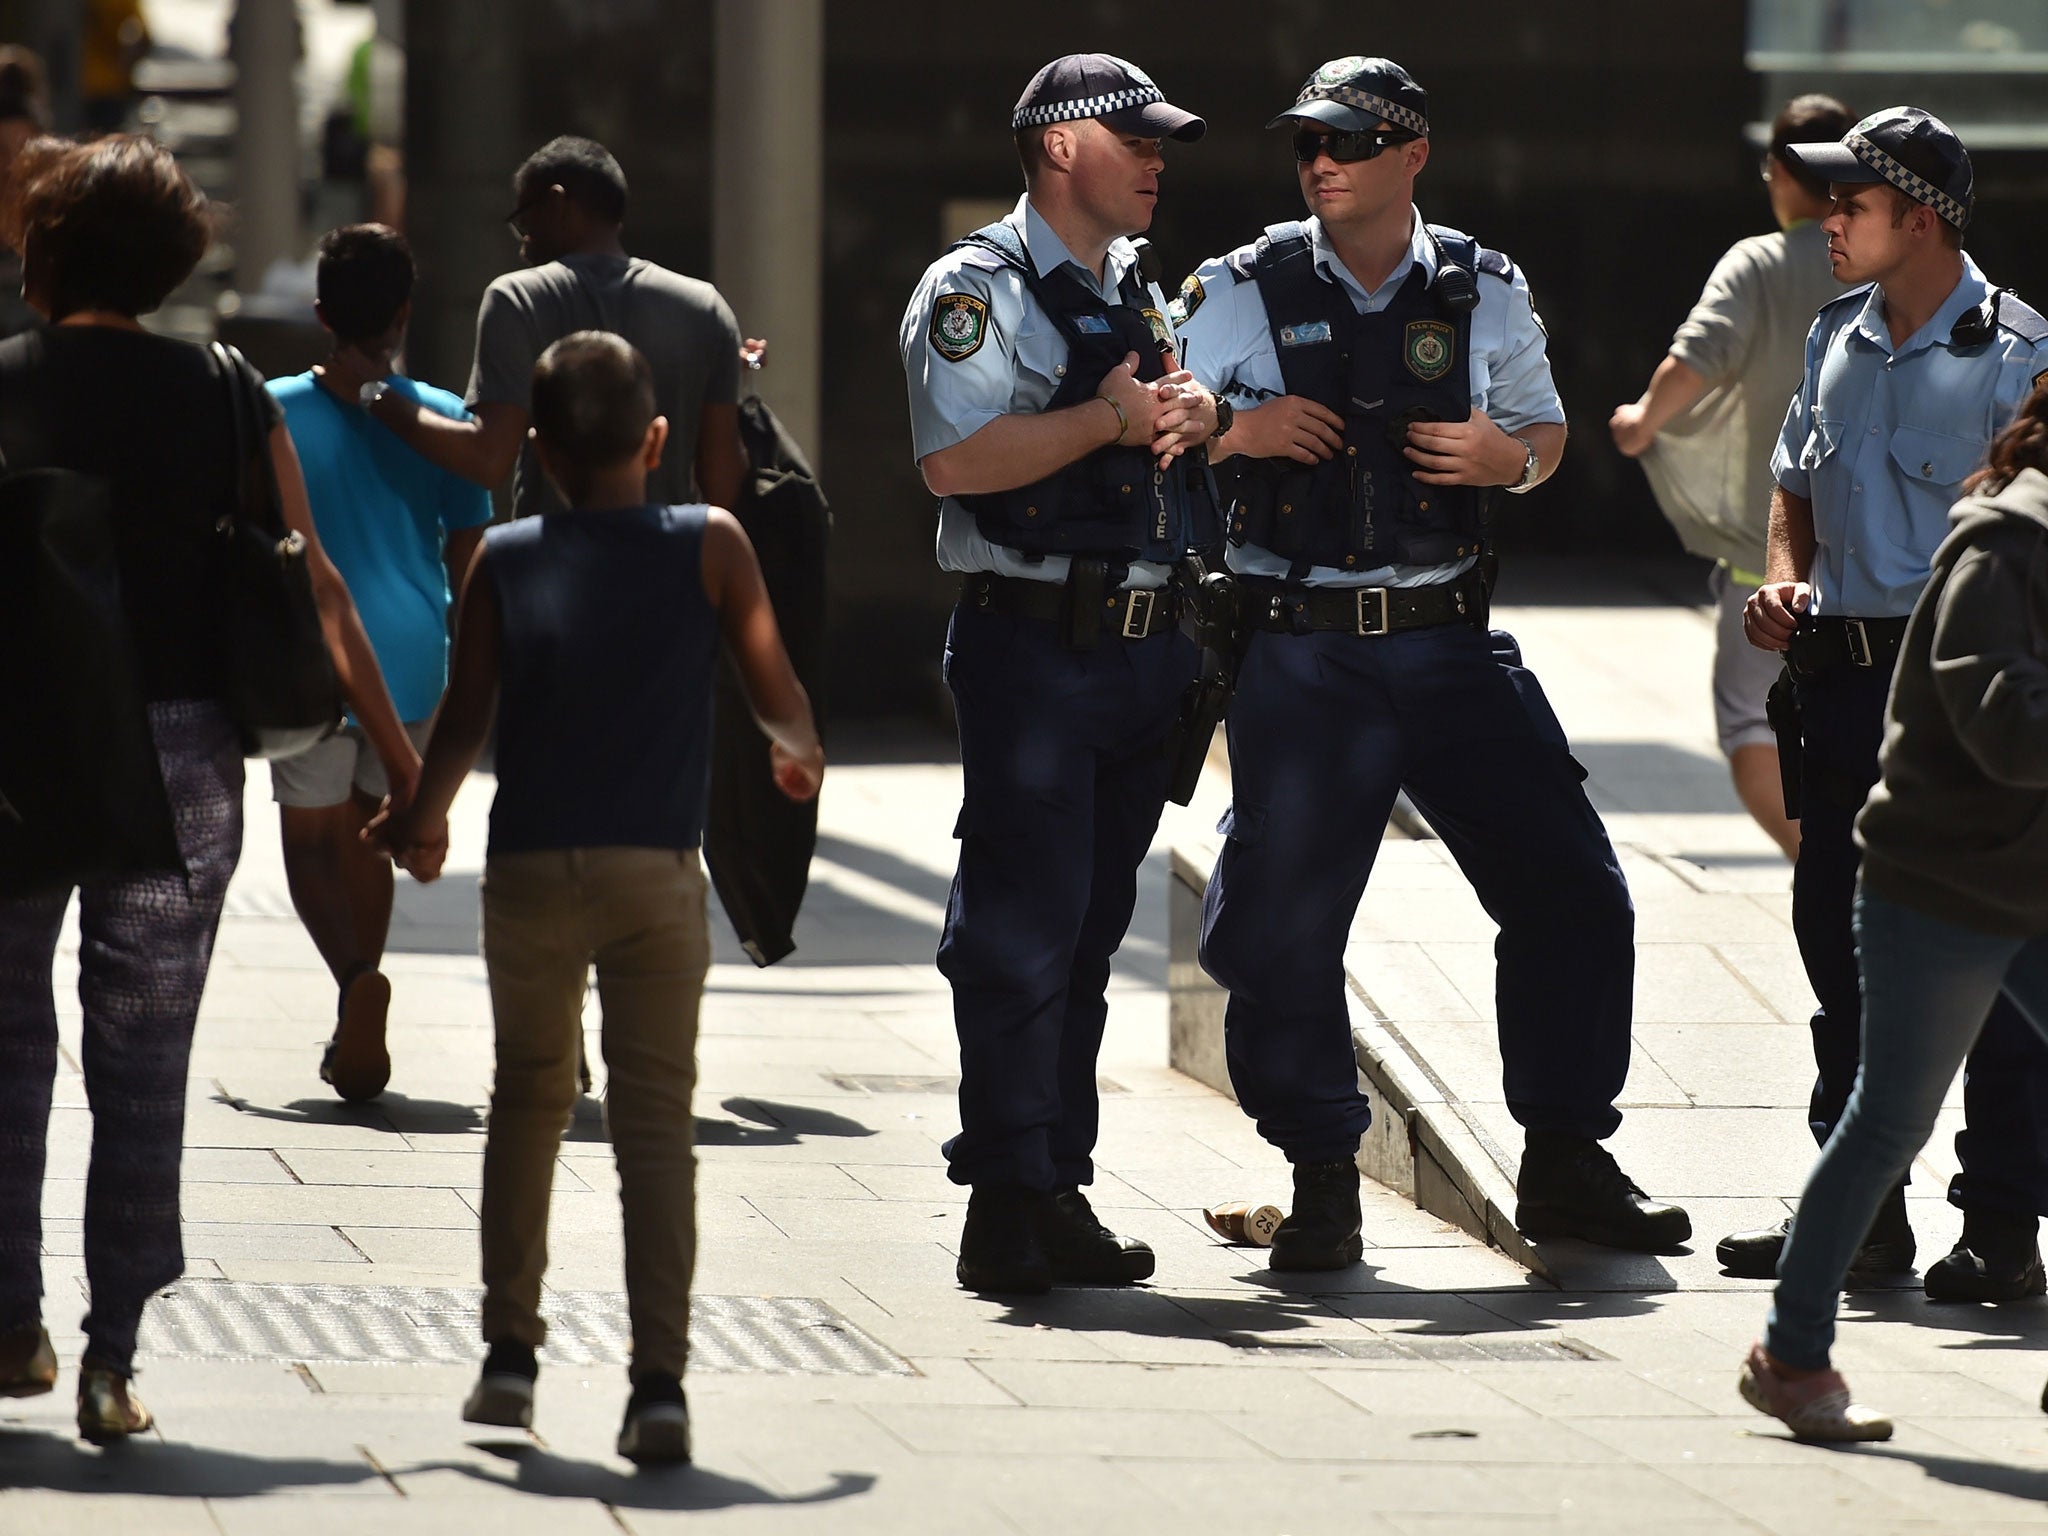 Police patrol the street in Sydney's central business district on December 24, 2014.